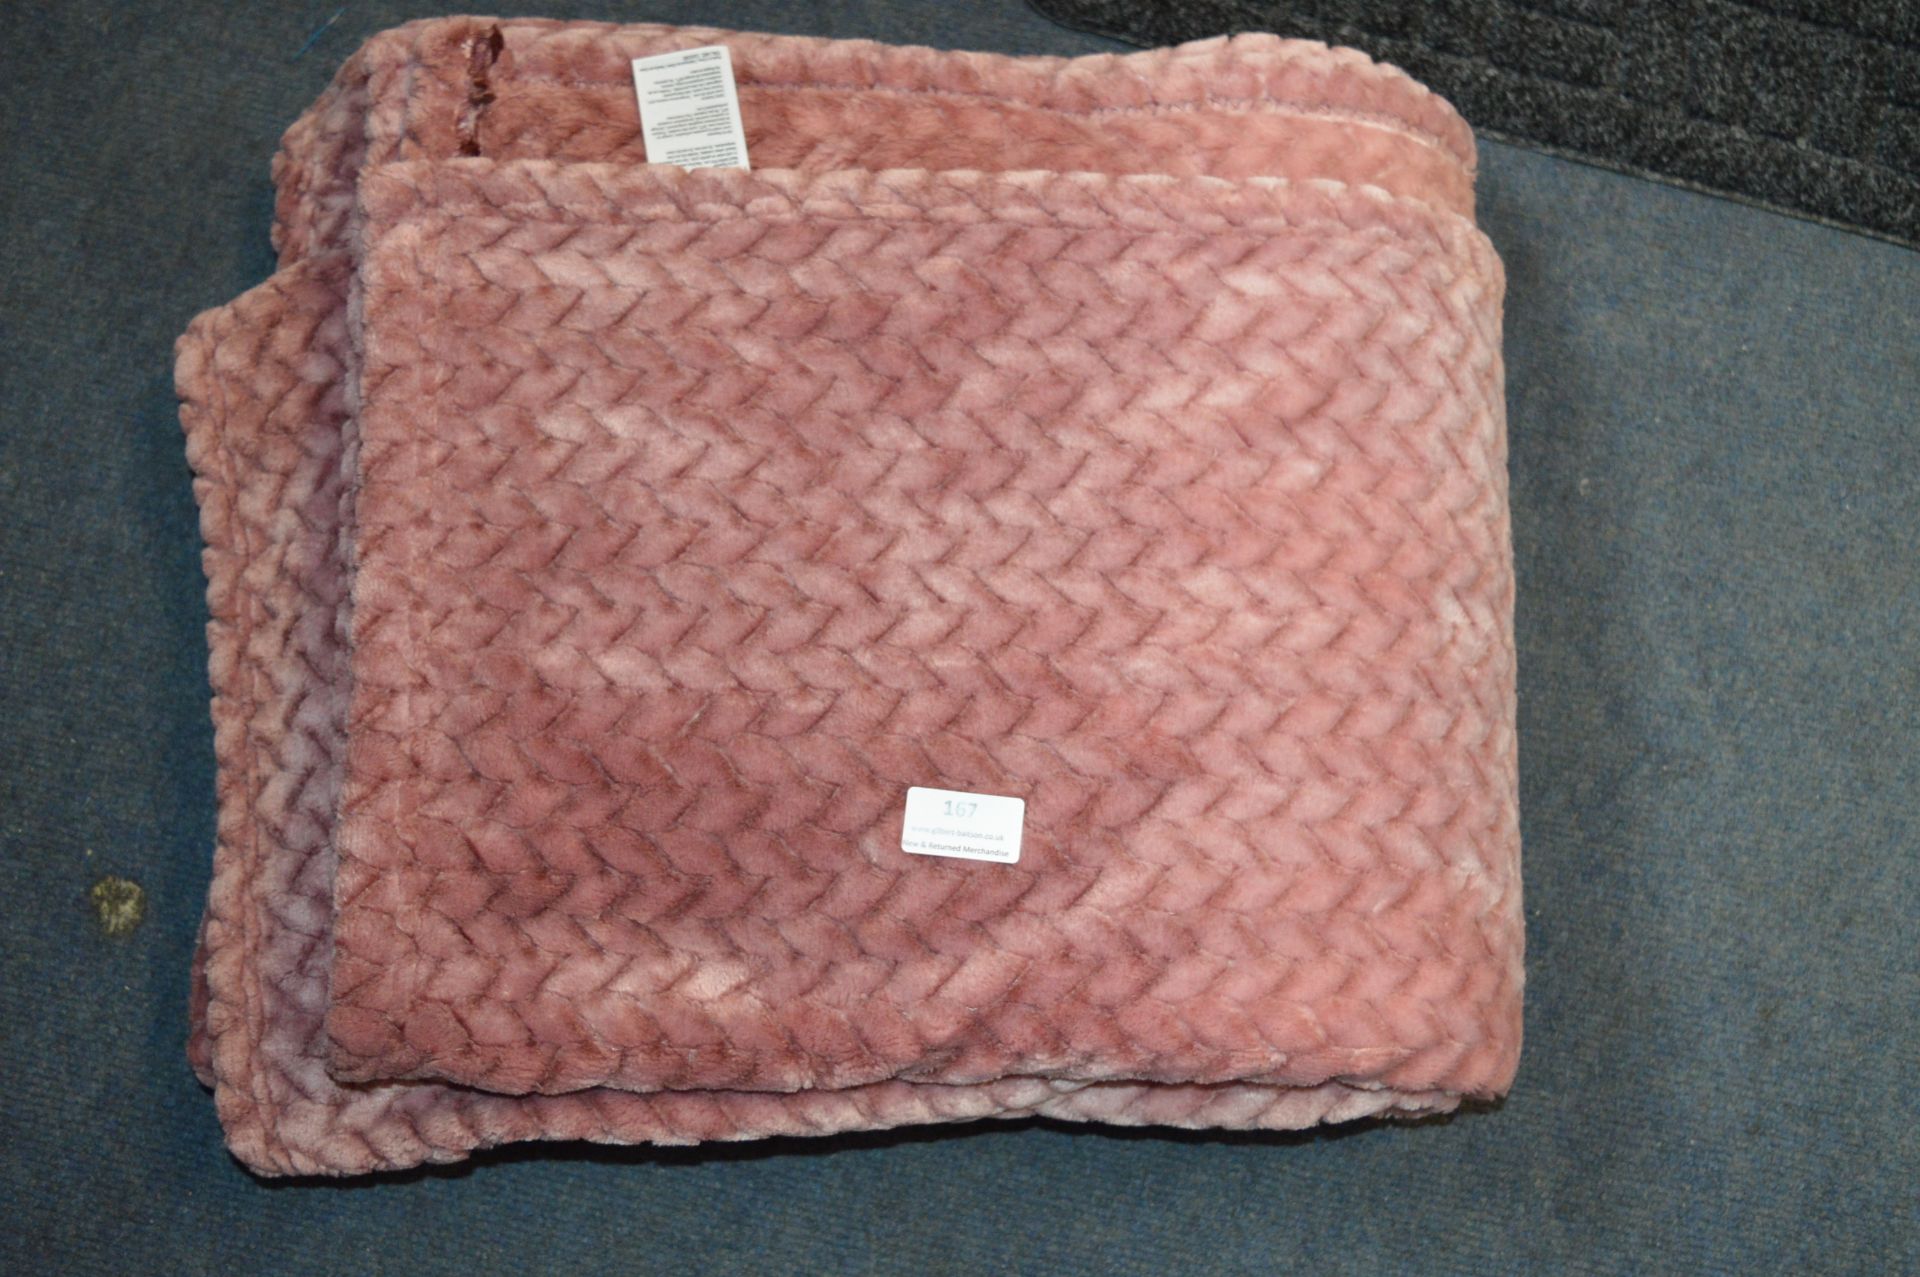 *Pink Quilted Throw